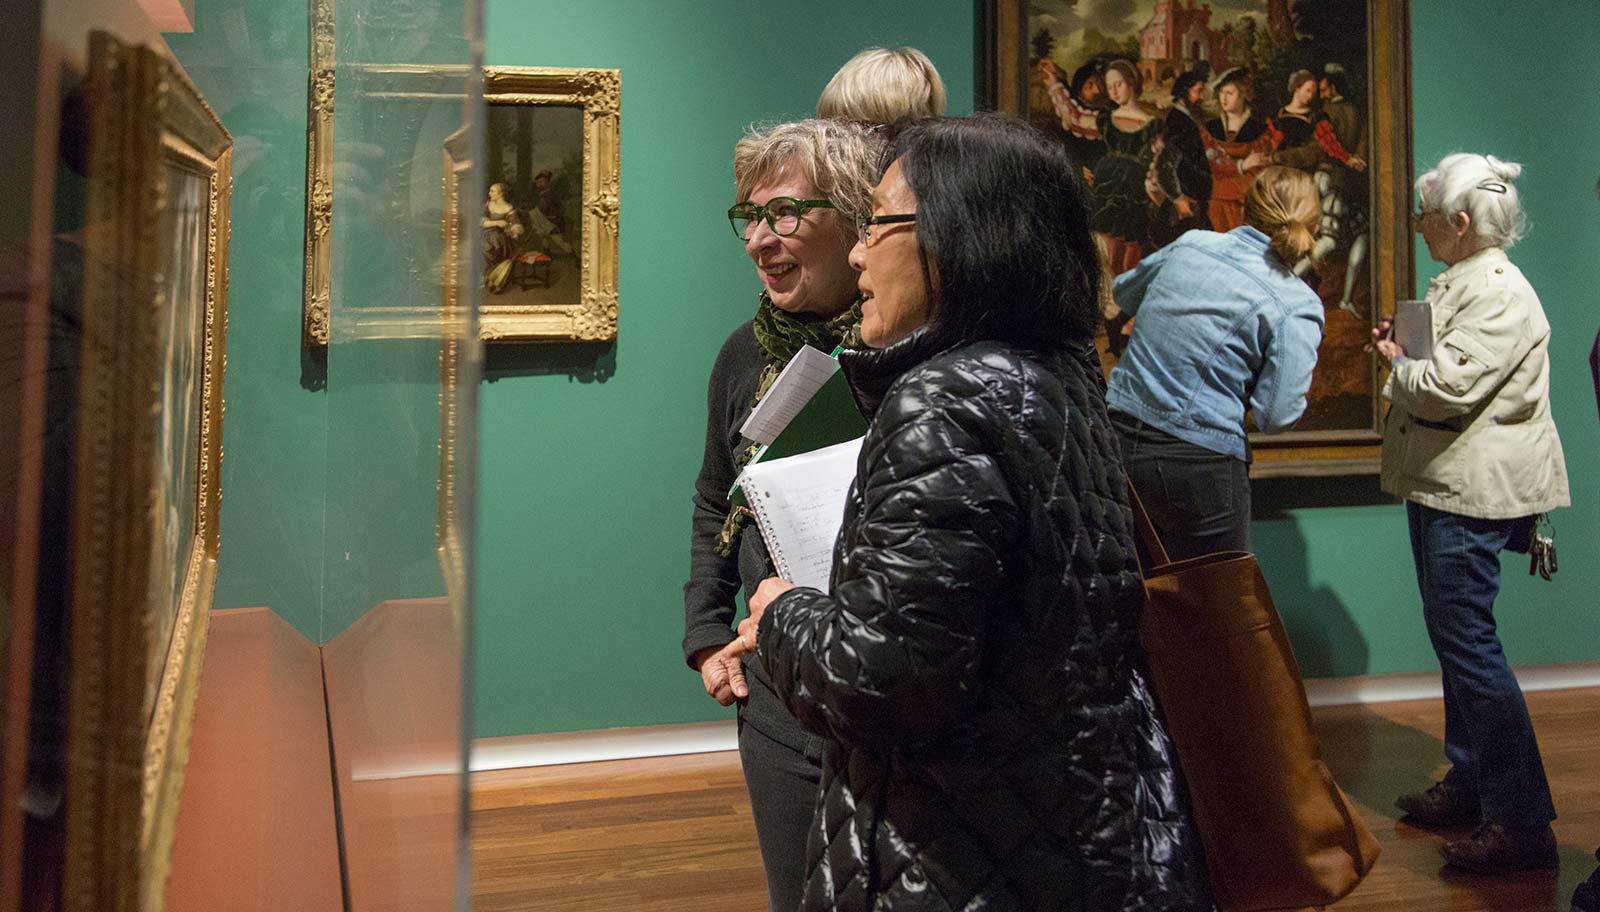 Docents looking at a work of art